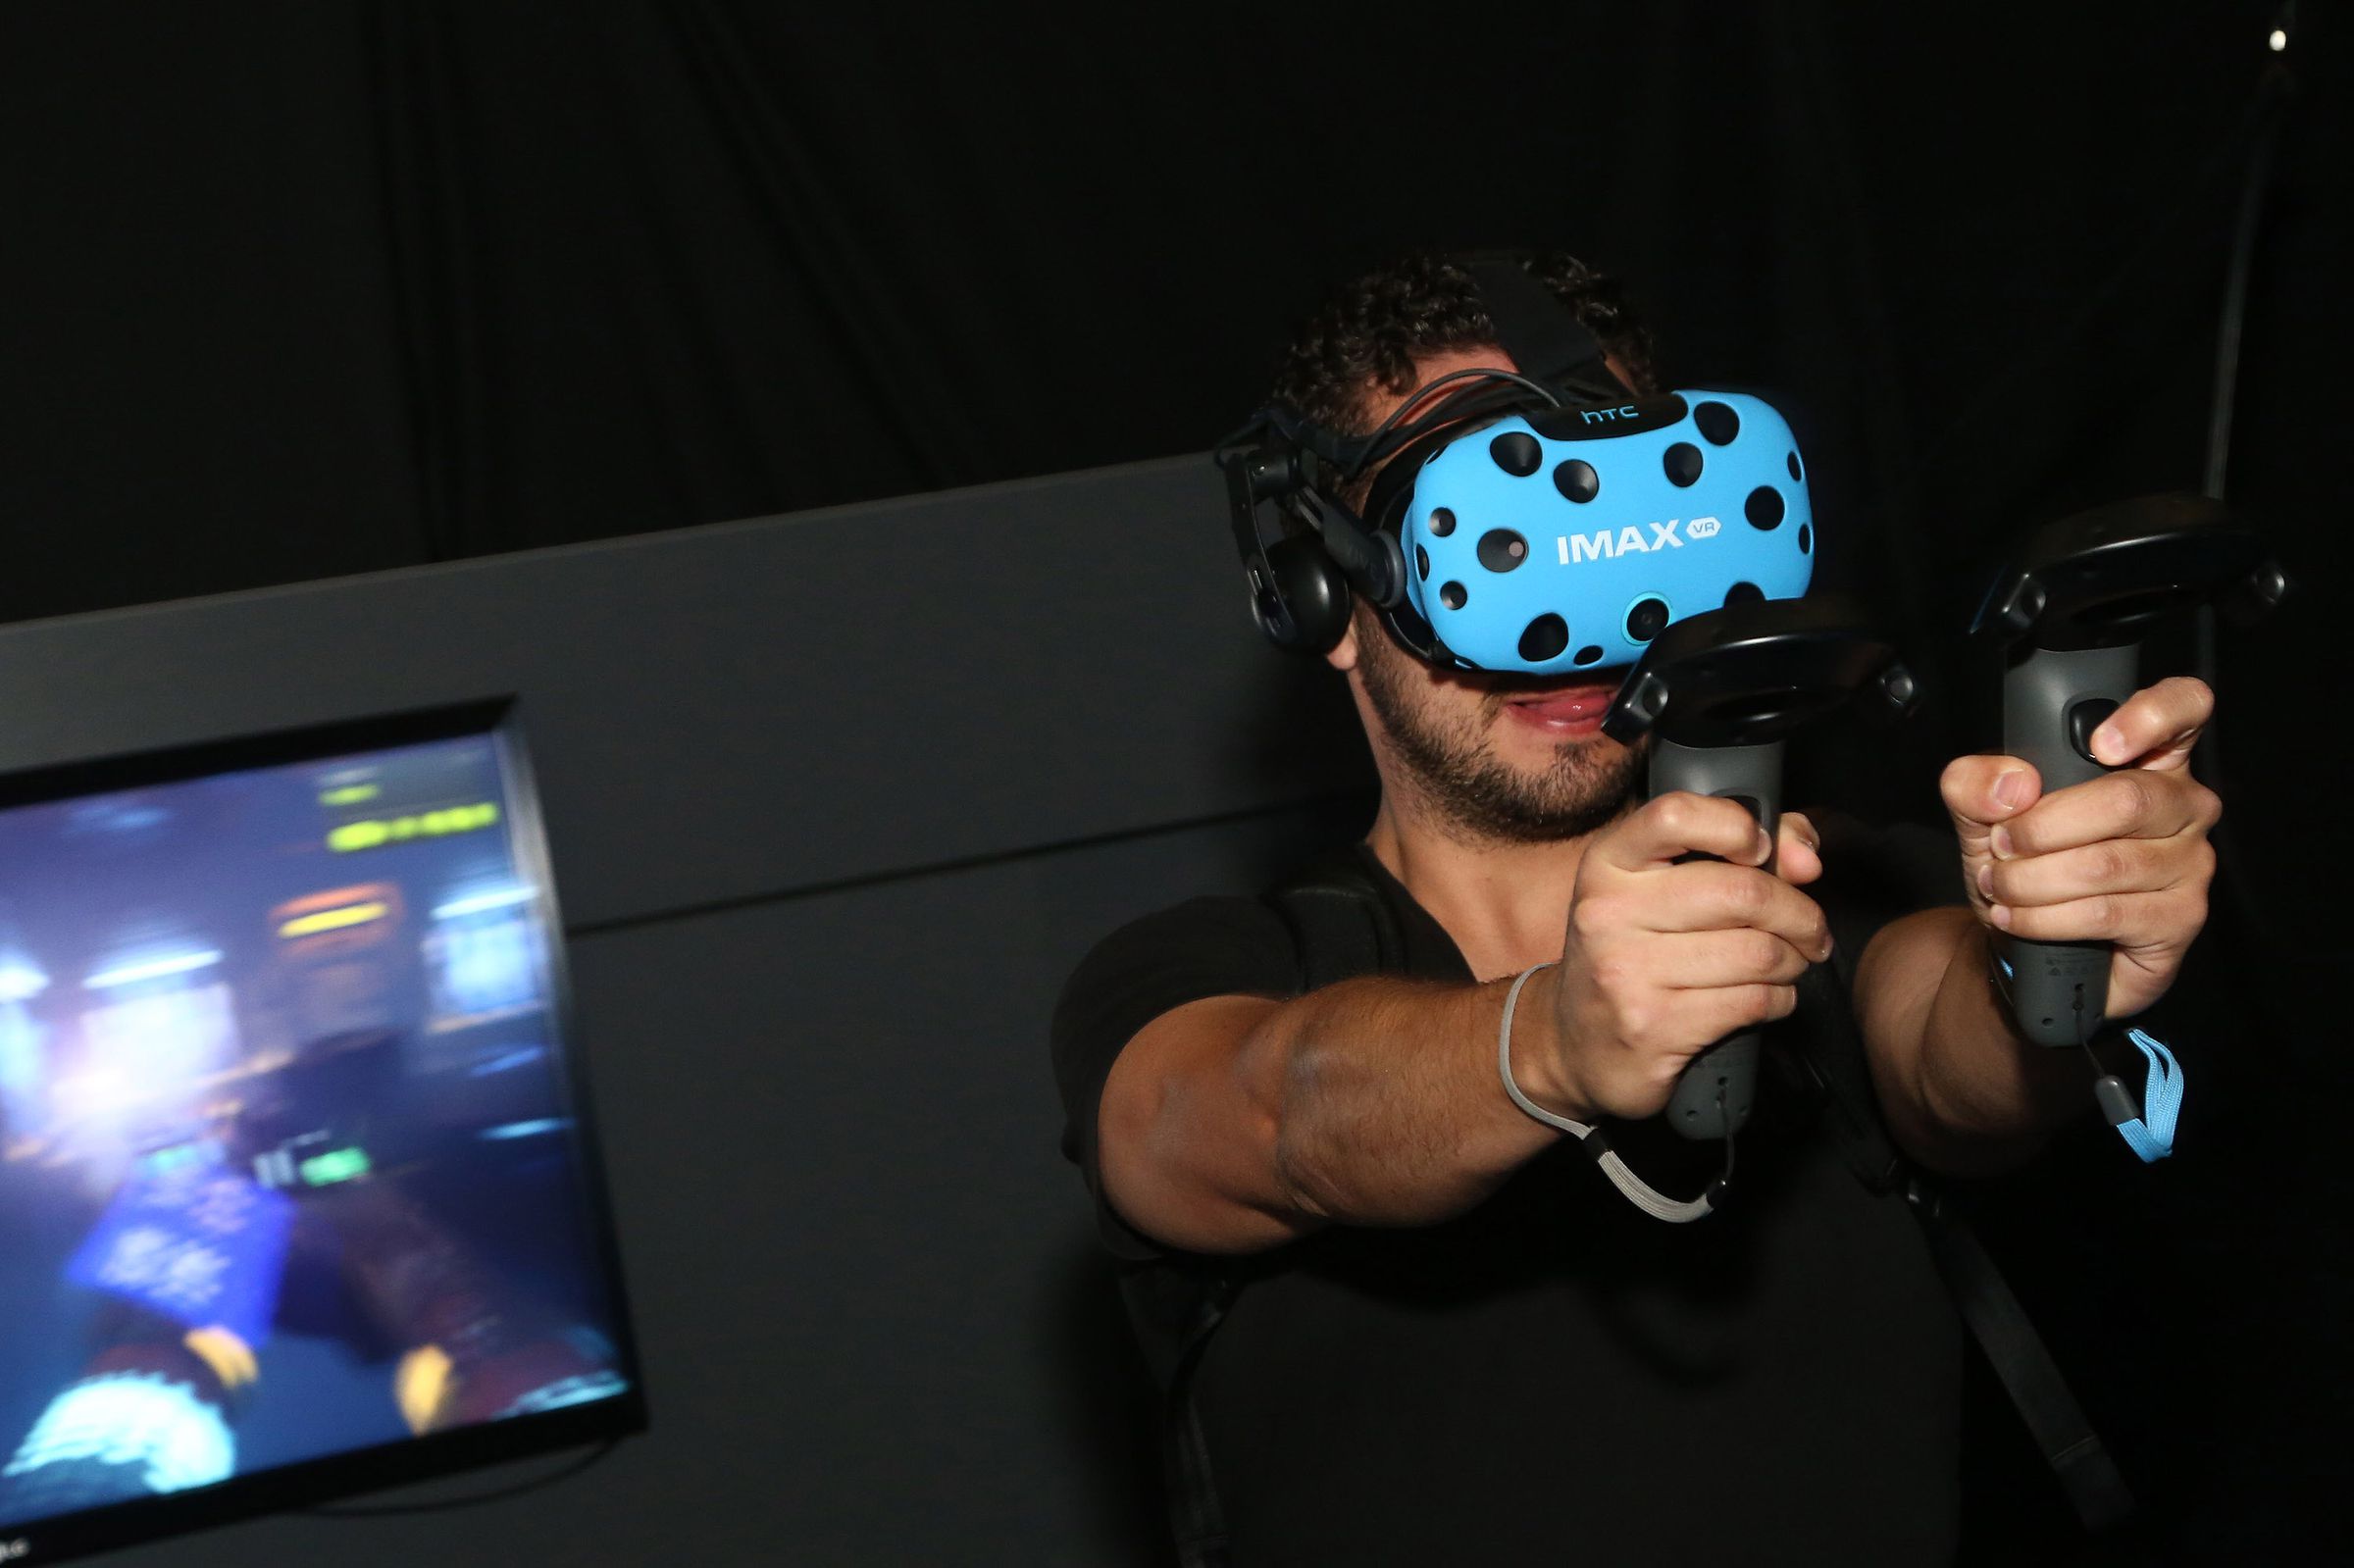 Exclusive launch of IMAX VR's New Virtual Reality Experience Deadwood Mansion by Glostation at the Flagship IMAX VR Centre in Los Angeles